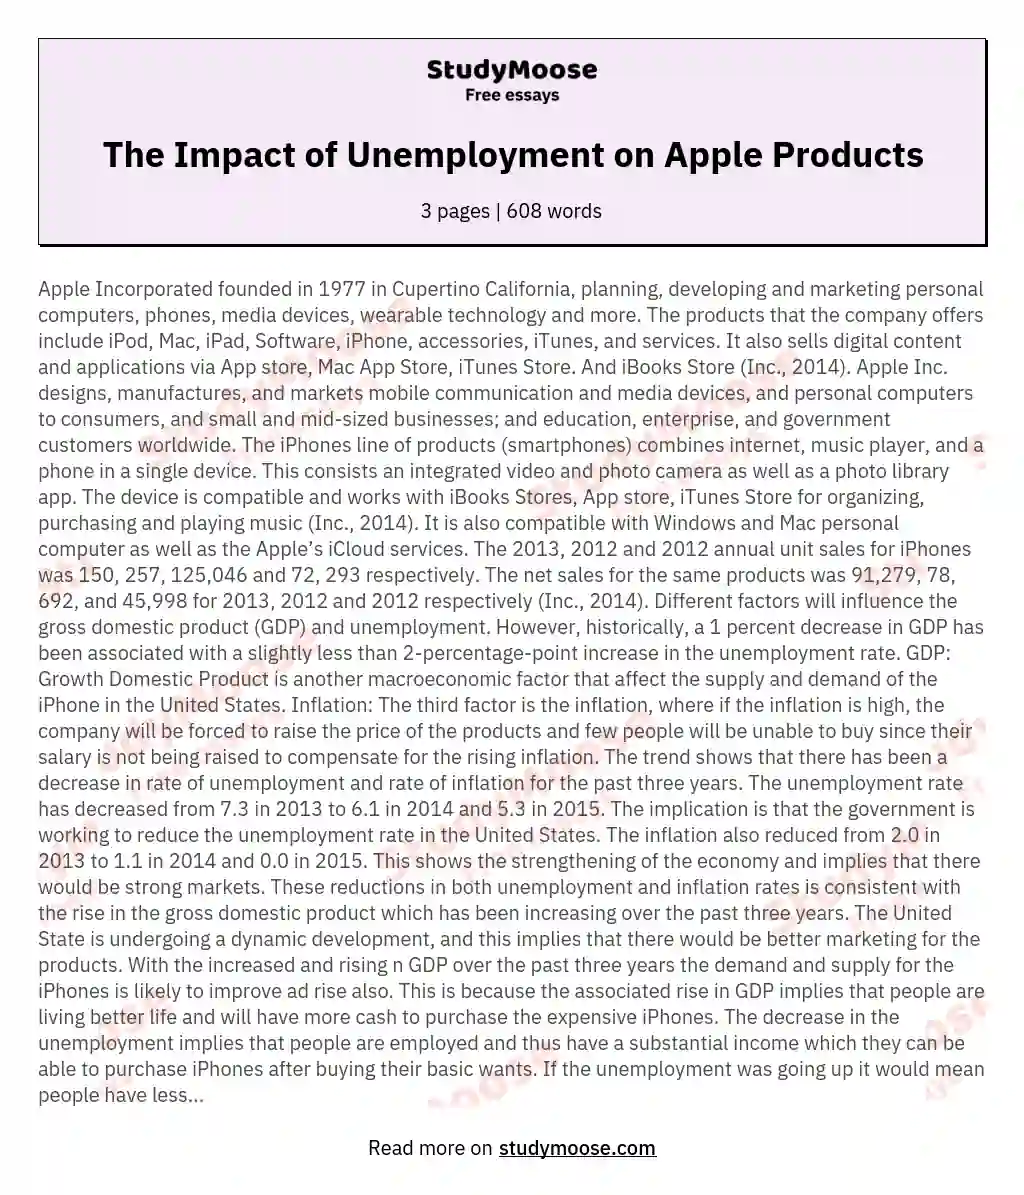 The Impact of Unemployment on Apple Products essay